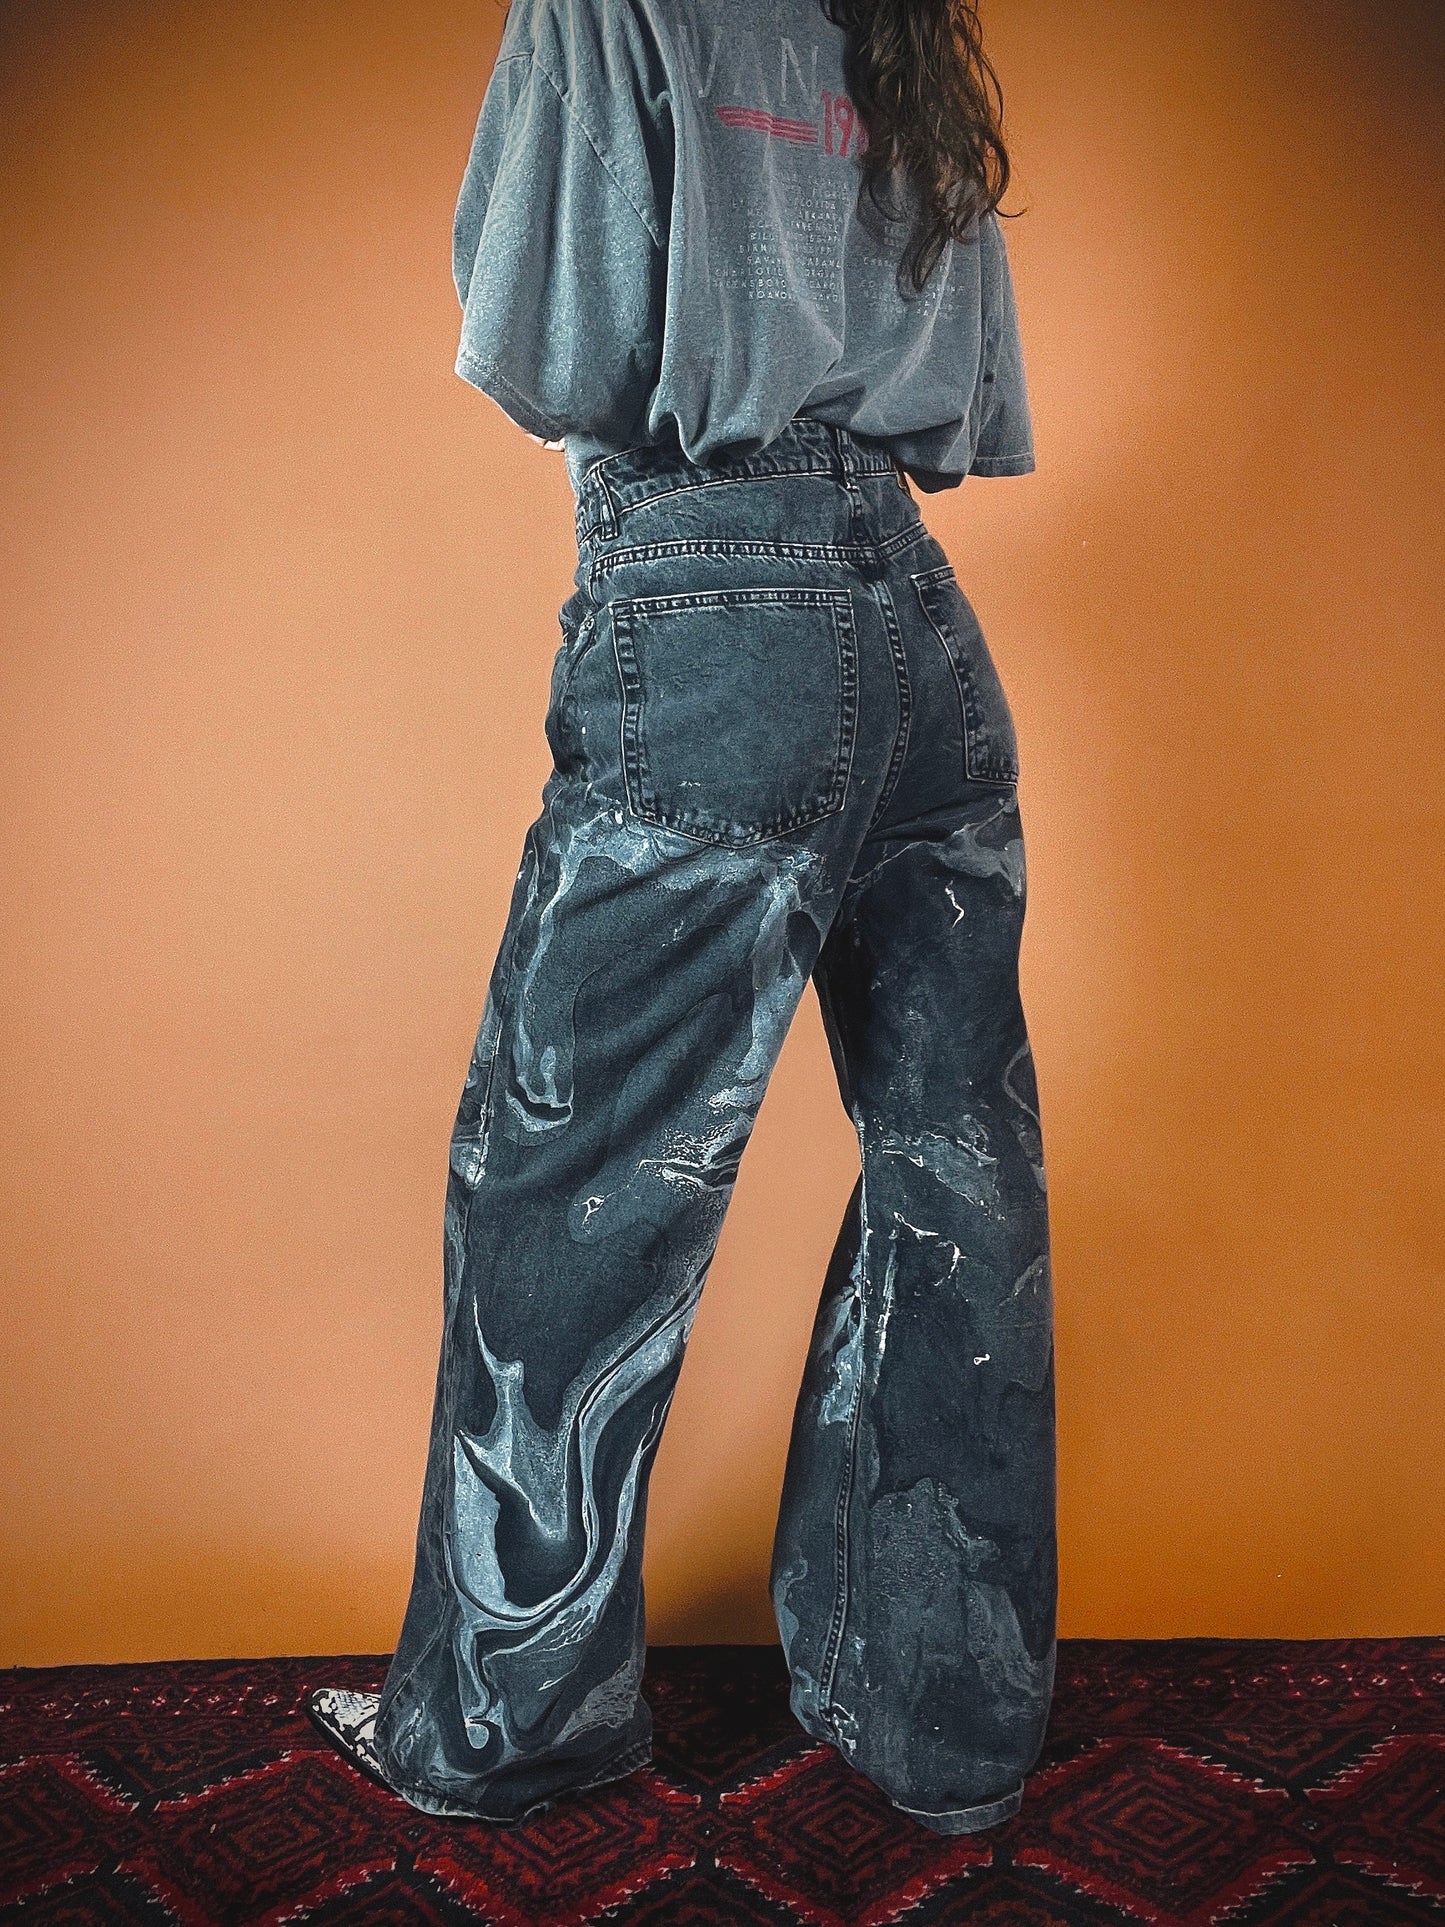 The Marbled Washed Out Black Wide Leg Jeans - 8/29"